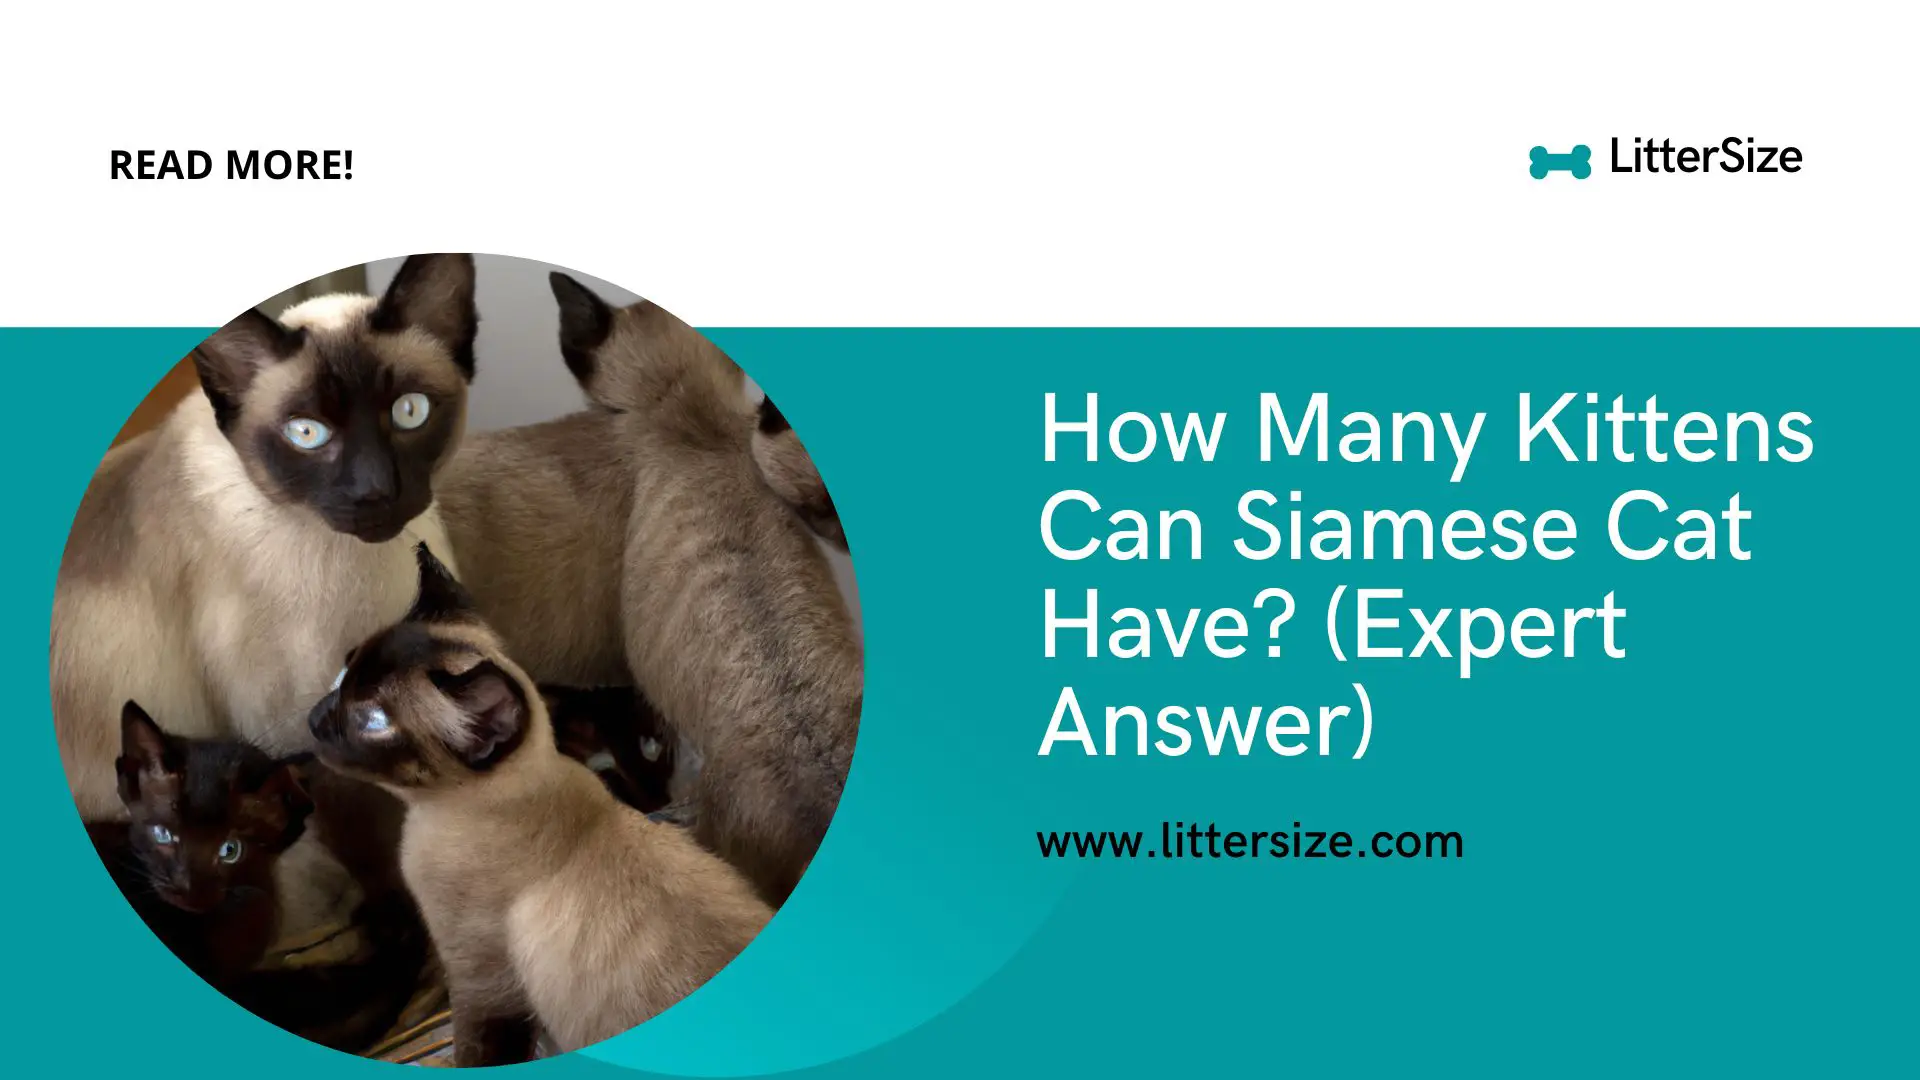 How Many Kittens Can Siamese Cat Have? (Expert Answer)